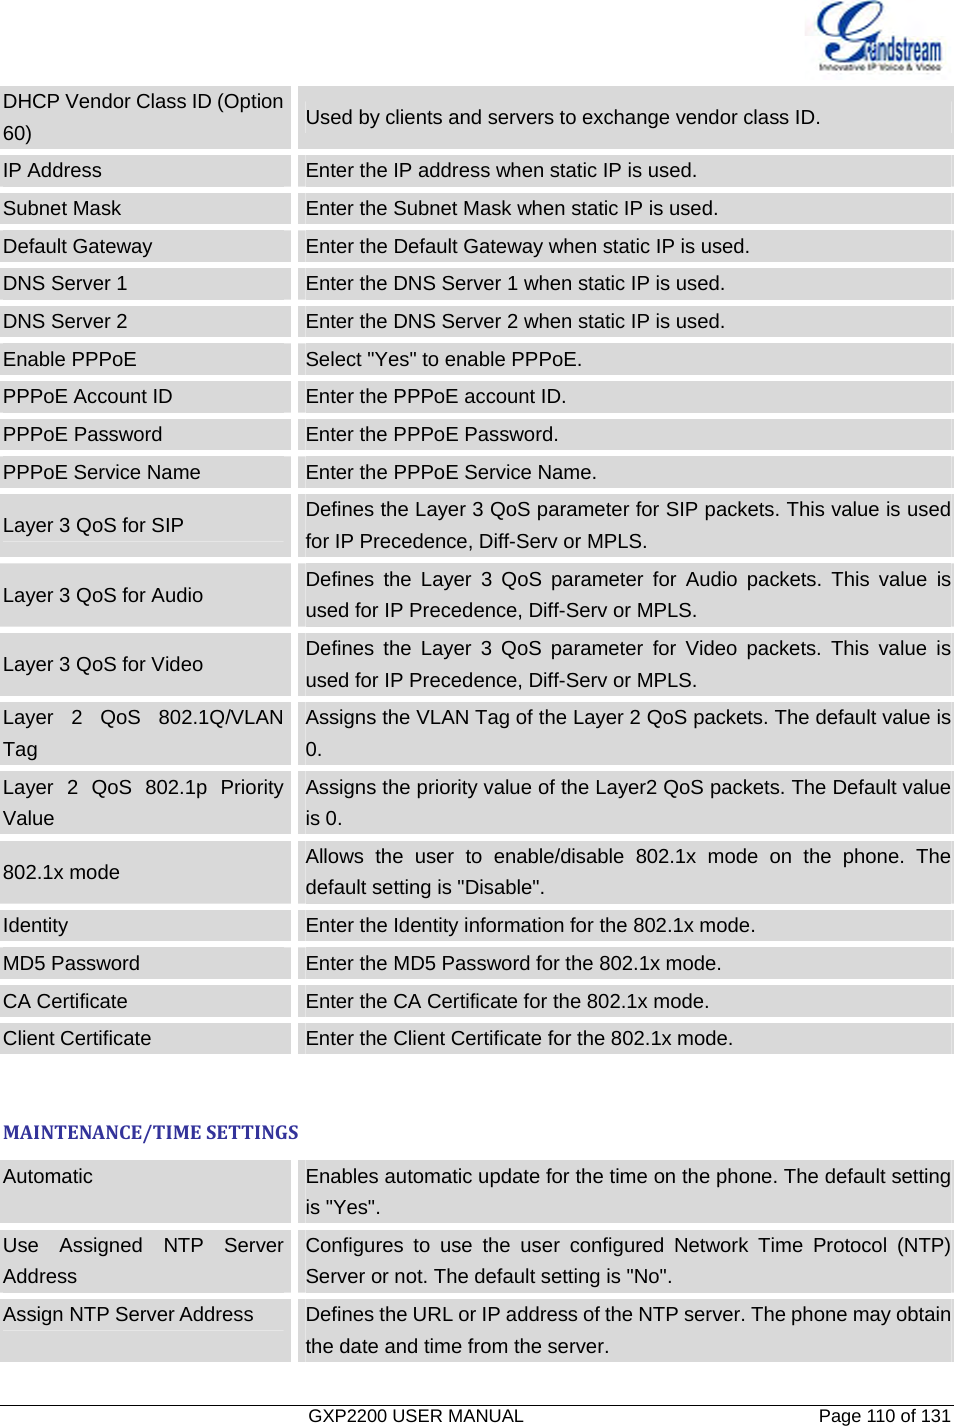   GXP2200 USER MANUAL       Page 110 of 131                                  DHCP Vendor Class ID (Option 60)  Used by clients and servers to exchange vendor class ID. IP Address  Enter the IP address when static IP is used. Subnet Mask  Enter the Subnet Mask when static IP is used. Default Gateway  Enter the Default Gateway when static IP is used. DNS Server 1  Enter the DNS Server 1 when static IP is used. DNS Server 2  Enter the DNS Server 2 when static IP is used. Enable PPPoE  Select &quot;Yes&quot; to enable PPPoE. PPPoE Account ID  Enter the PPPoE account ID. PPPoE Password  Enter the PPPoE Password. PPPoE Service Name  Enter the PPPoE Service Name. Layer 3 QoS for SIP  Defines the Layer 3 QoS parameter for SIP packets. This value is used for IP Precedence, Diff-Serv or MPLS. Layer 3 QoS for Audio  Defines the Layer 3 QoS parameter for Audio packets. This value is used for IP Precedence, Diff-Serv or MPLS. Layer 3 QoS for Video  Defines the Layer 3 QoS parameter for Video packets. This value is used for IP Precedence, Diff-Serv or MPLS. Layer 2 QoS 802.1Q/VLAN Tag Assigns the VLAN Tag of the Layer 2 QoS packets. The default value is 0. Layer 2 QoS 802.1p Priority Value Assigns the priority value of the Layer2 QoS packets. The Default value is 0. 802.1x mode  Allows the user to enable/disable 802.1x mode on the phone. The default setting is &quot;Disable&quot;. Identity  Enter the Identity information for the 802.1x mode. MD5 Password  Enter the MD5 Password for the 802.1x mode. CA Certificate  Enter the CA Certificate for the 802.1x mode. Client Certificate  Enter the Client Certificate for the 802.1x mode. MAINTENANCE/TIMESETTINGSAutomatic  Enables automatic update for the time on the phone. The default setting is &quot;Yes&quot;. Use Assigned NTP Server Address Configures to use the user configured Network Time Protocol (NTP) Server or not. The default setting is &quot;No&quot;. Assign NTP Server Address  Defines the URL or IP address of the NTP server. The phone may obtain the date and time from the server. 